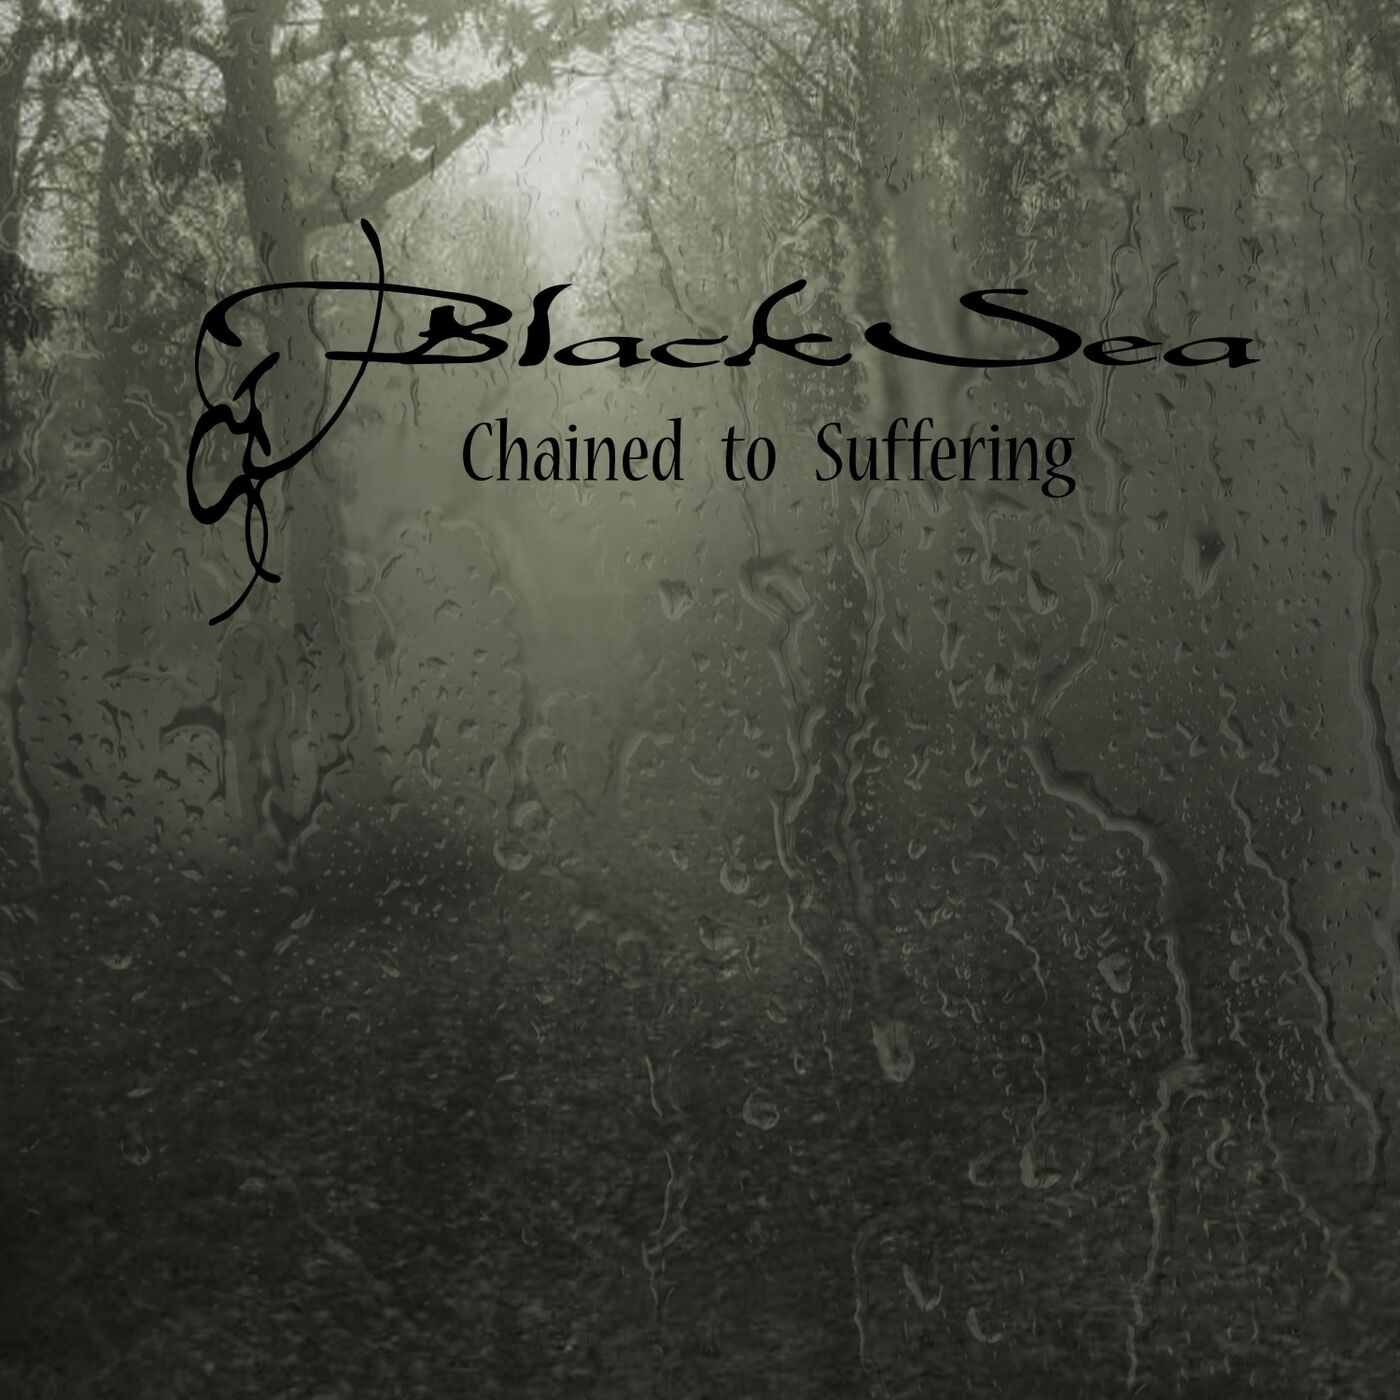 Black Sea – Chained to suffering (doom metal)